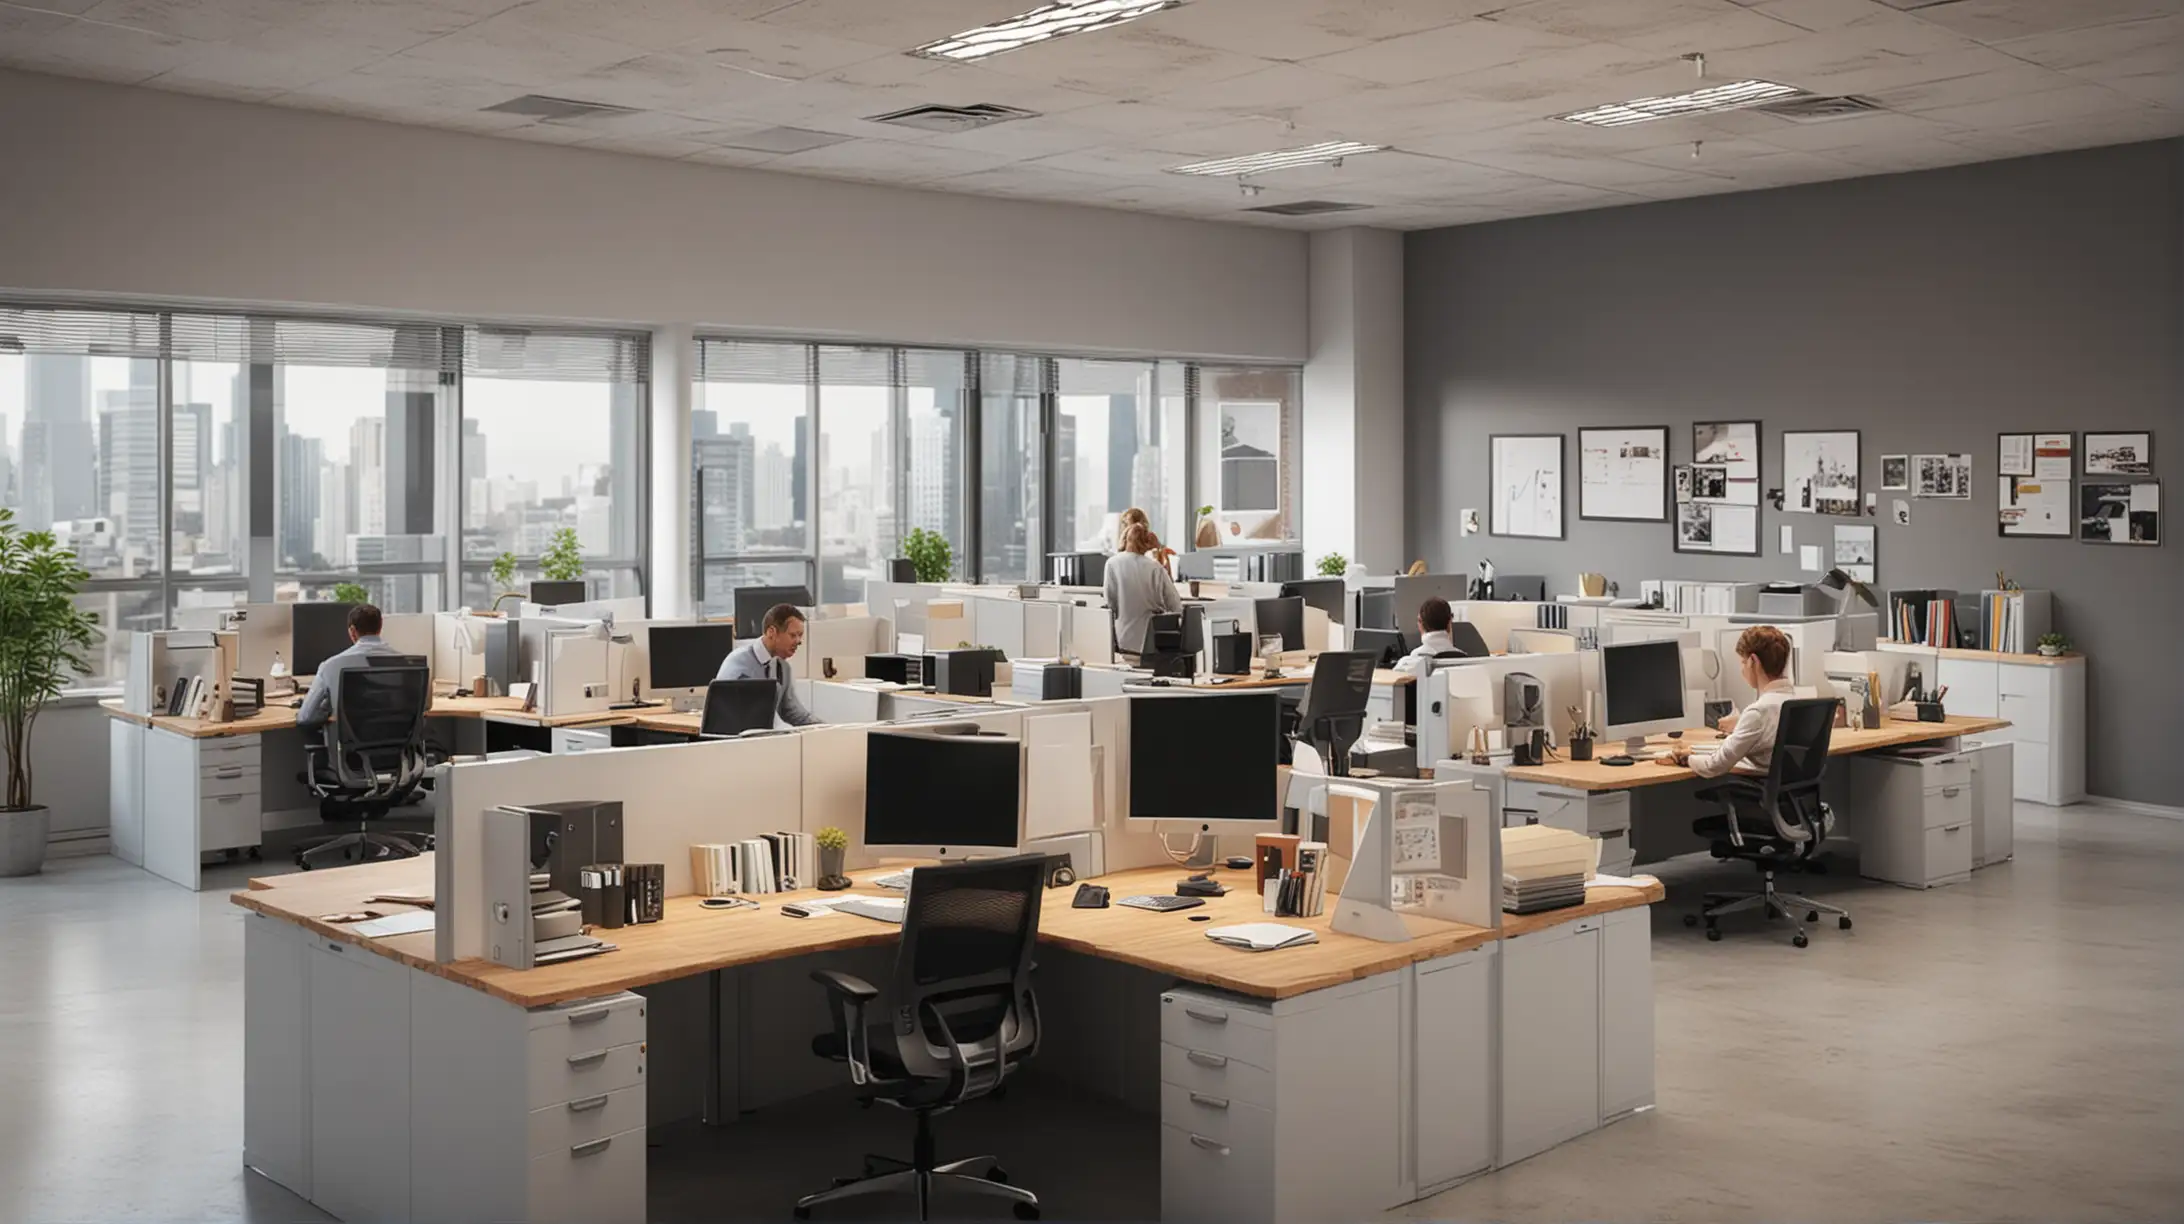 Professional Employees Working in a Realistic Corporate Office Setting